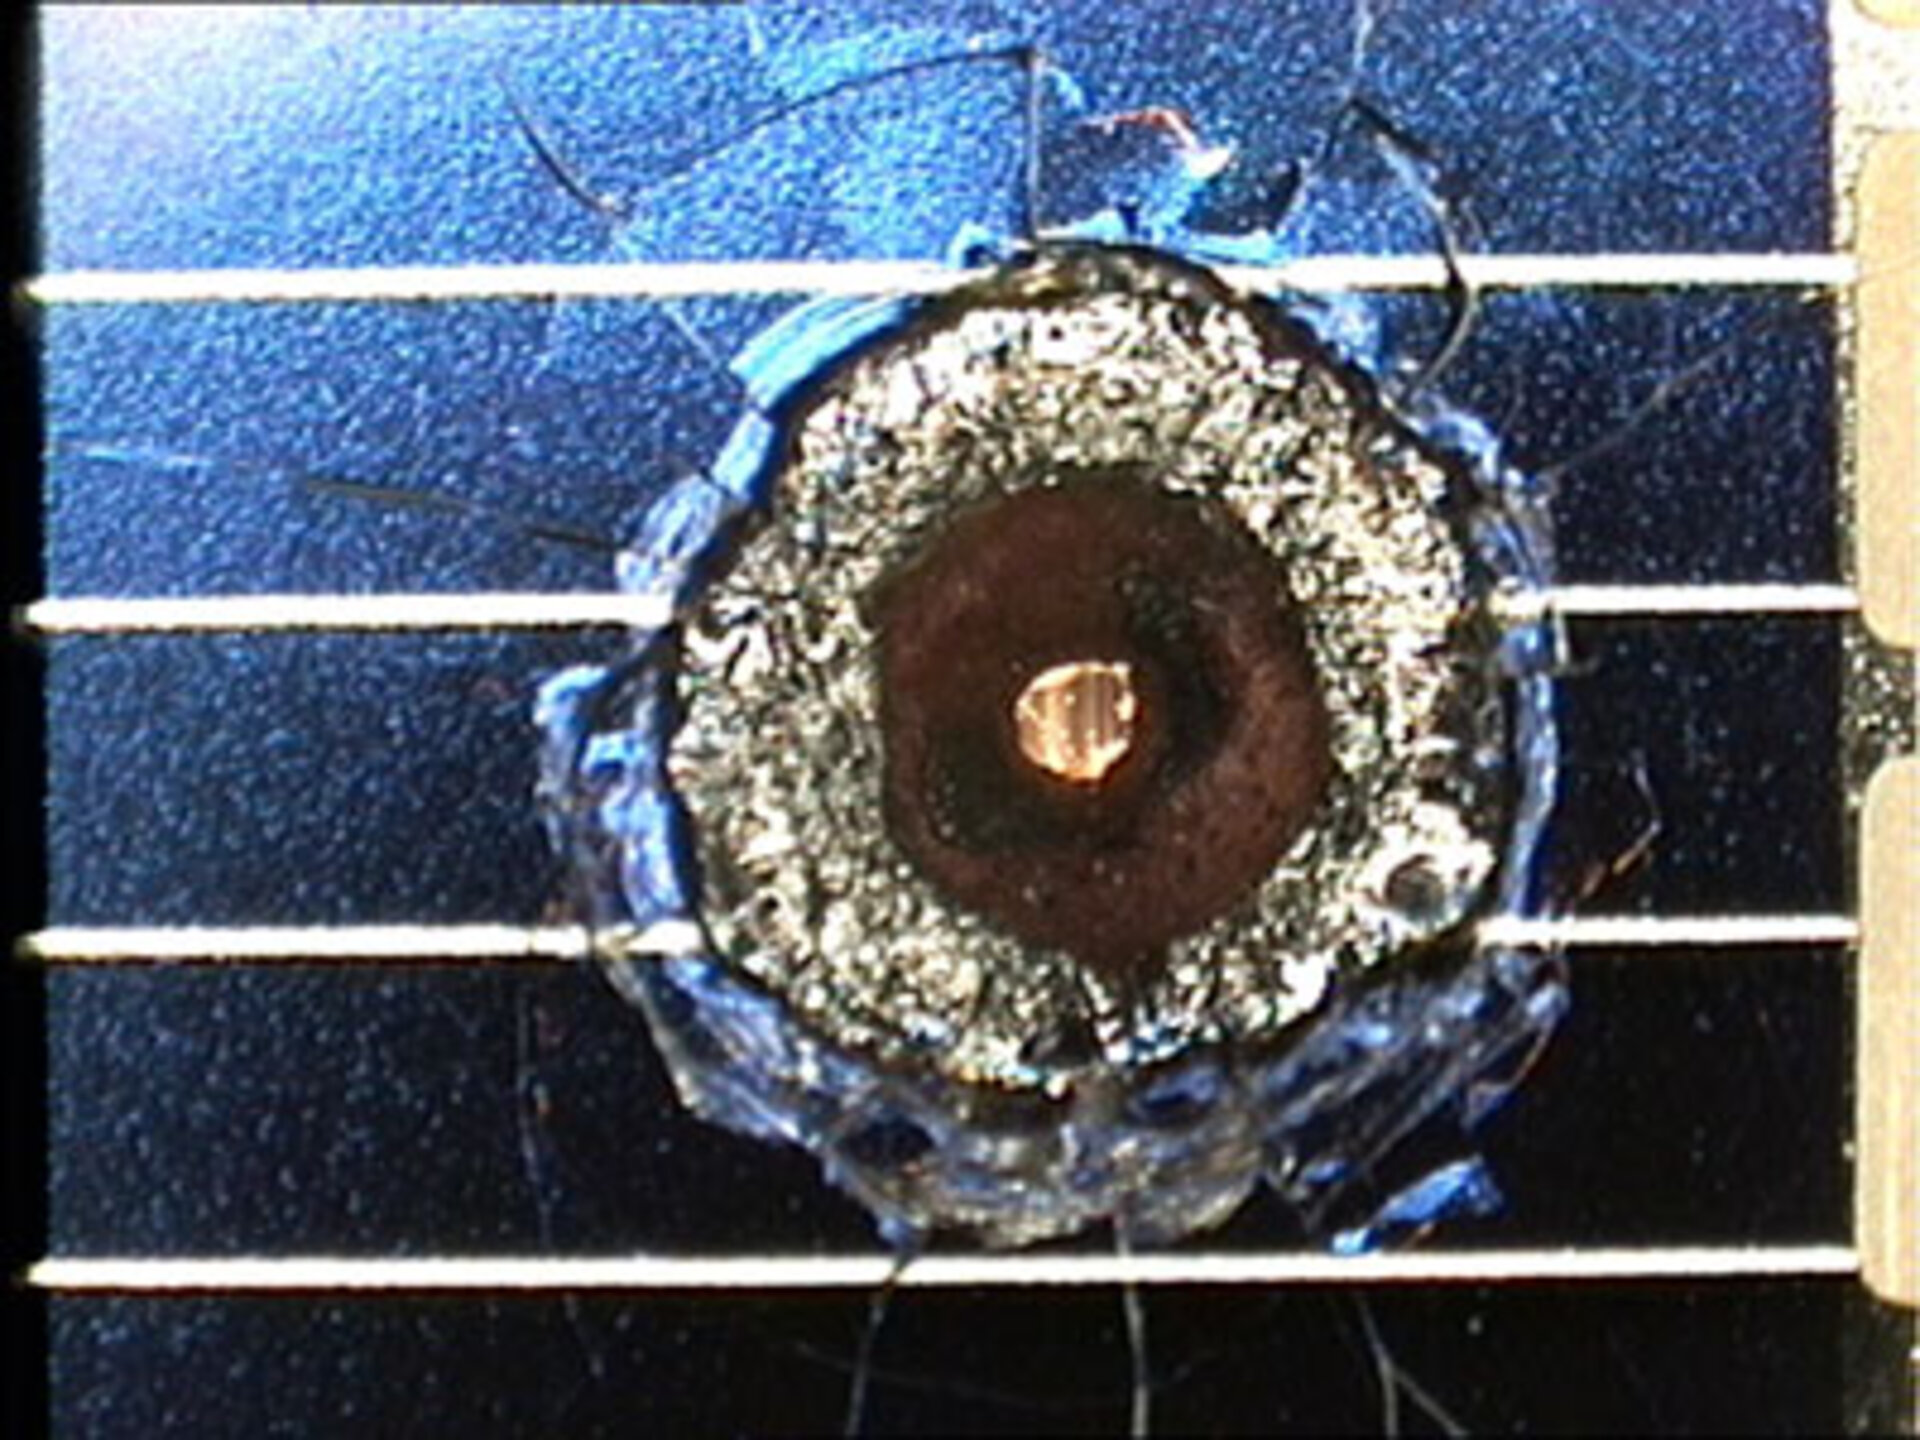 Crater size: 3.5 mm, hole size: 0.5 mm